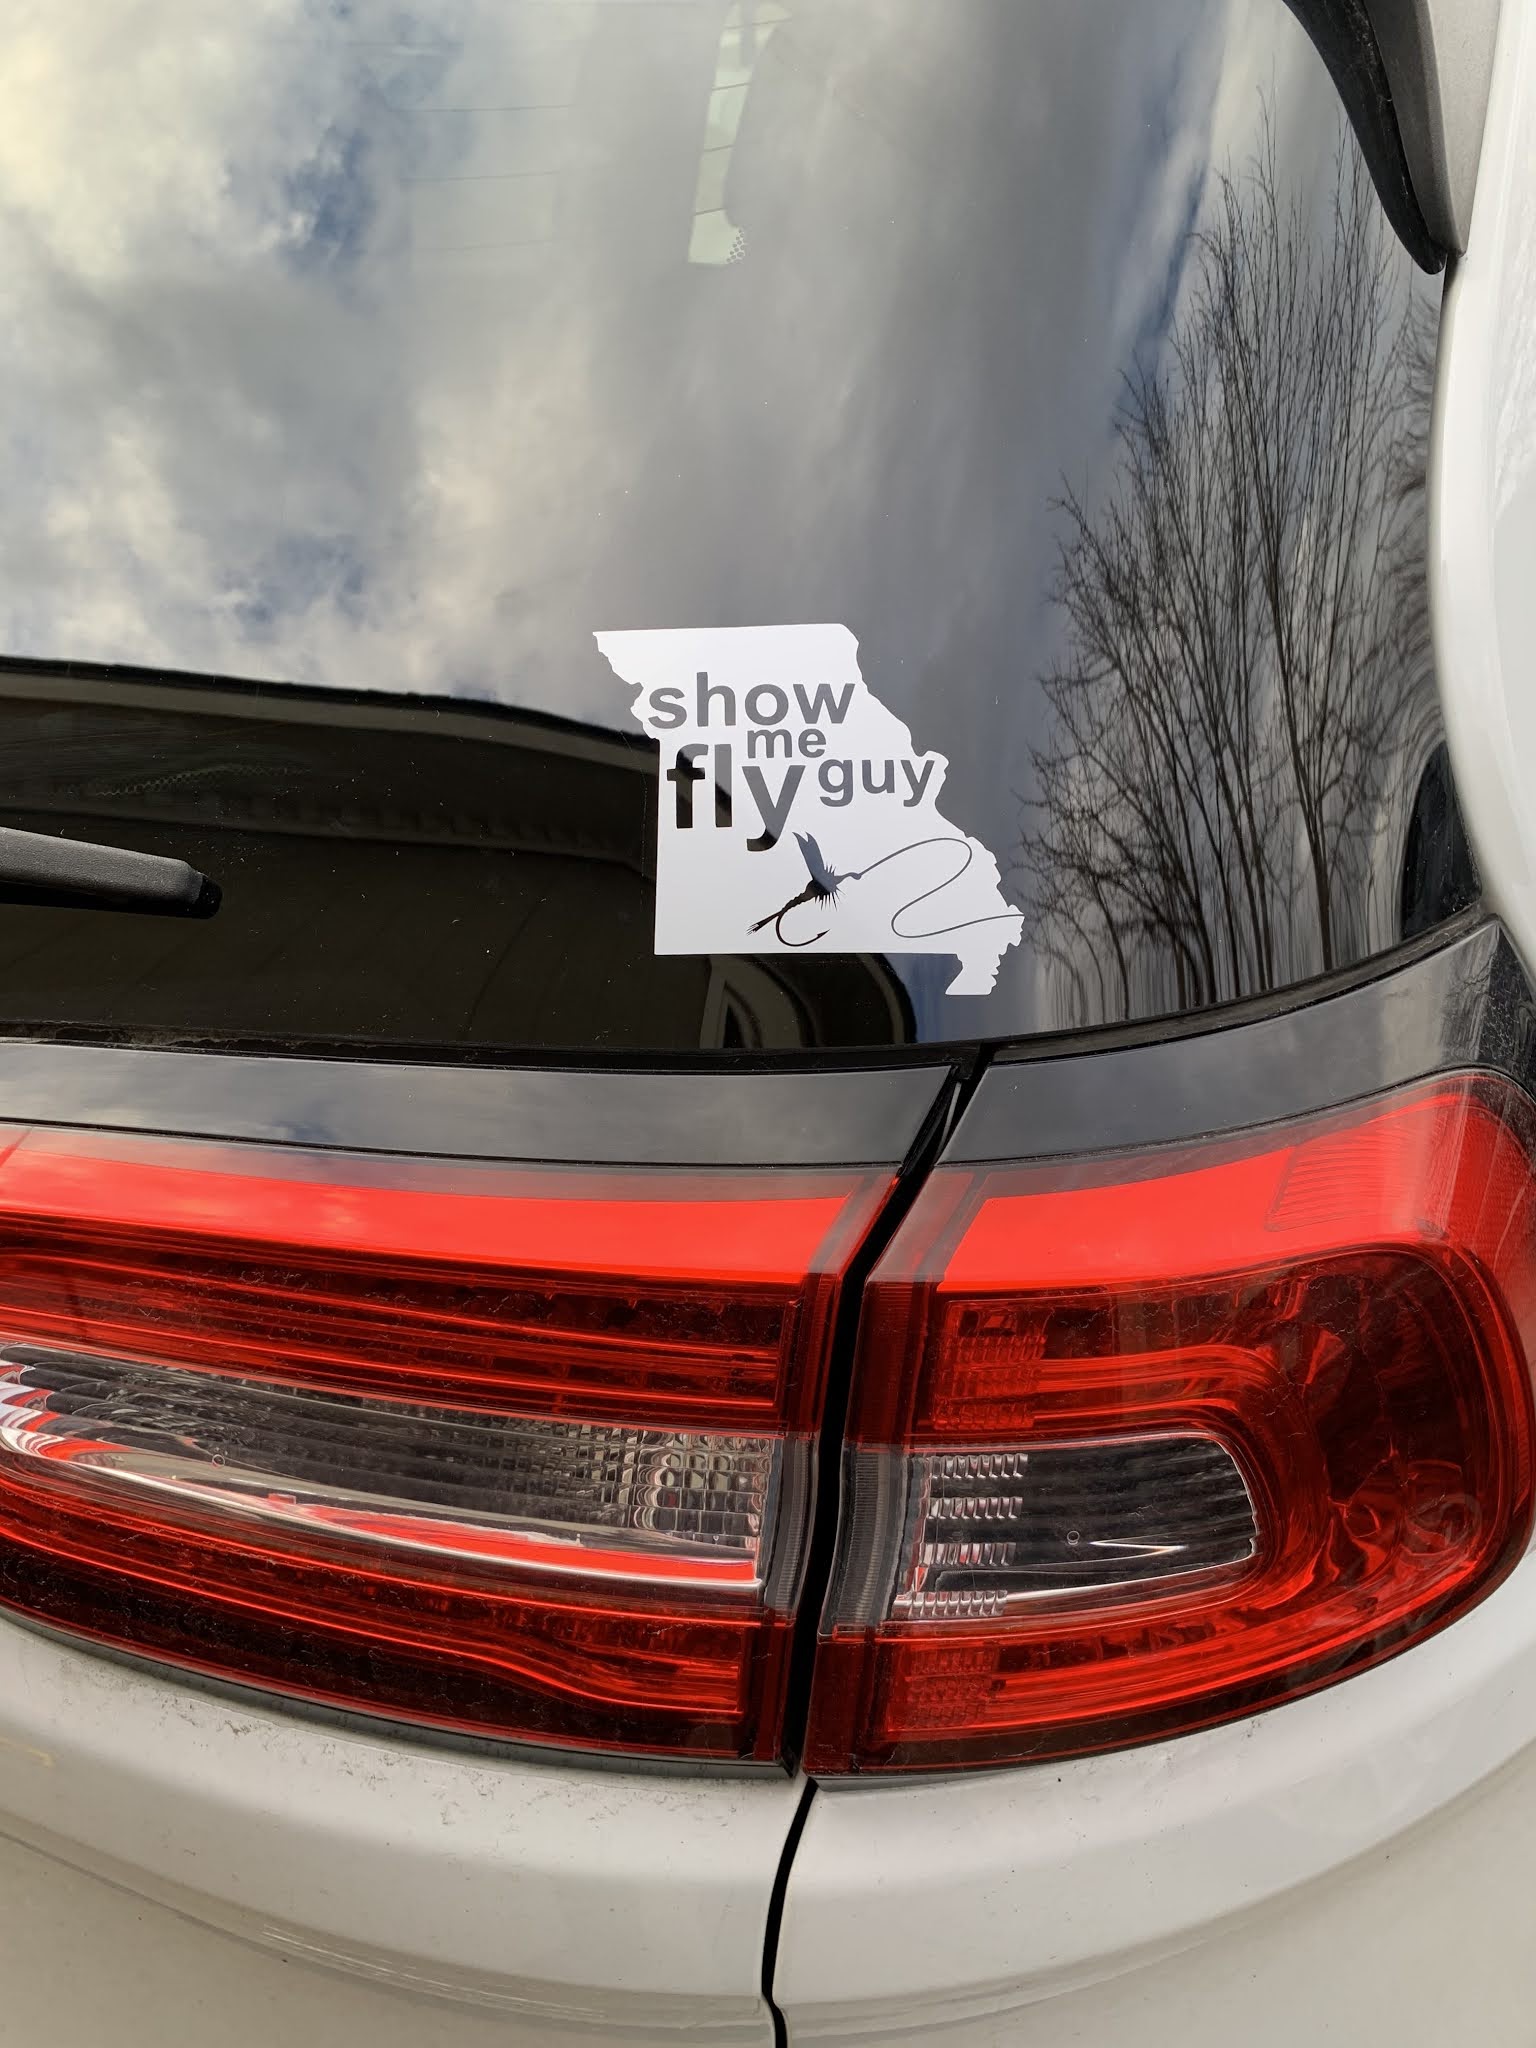 The Show Me Fly Guy: New Back Window Sticker